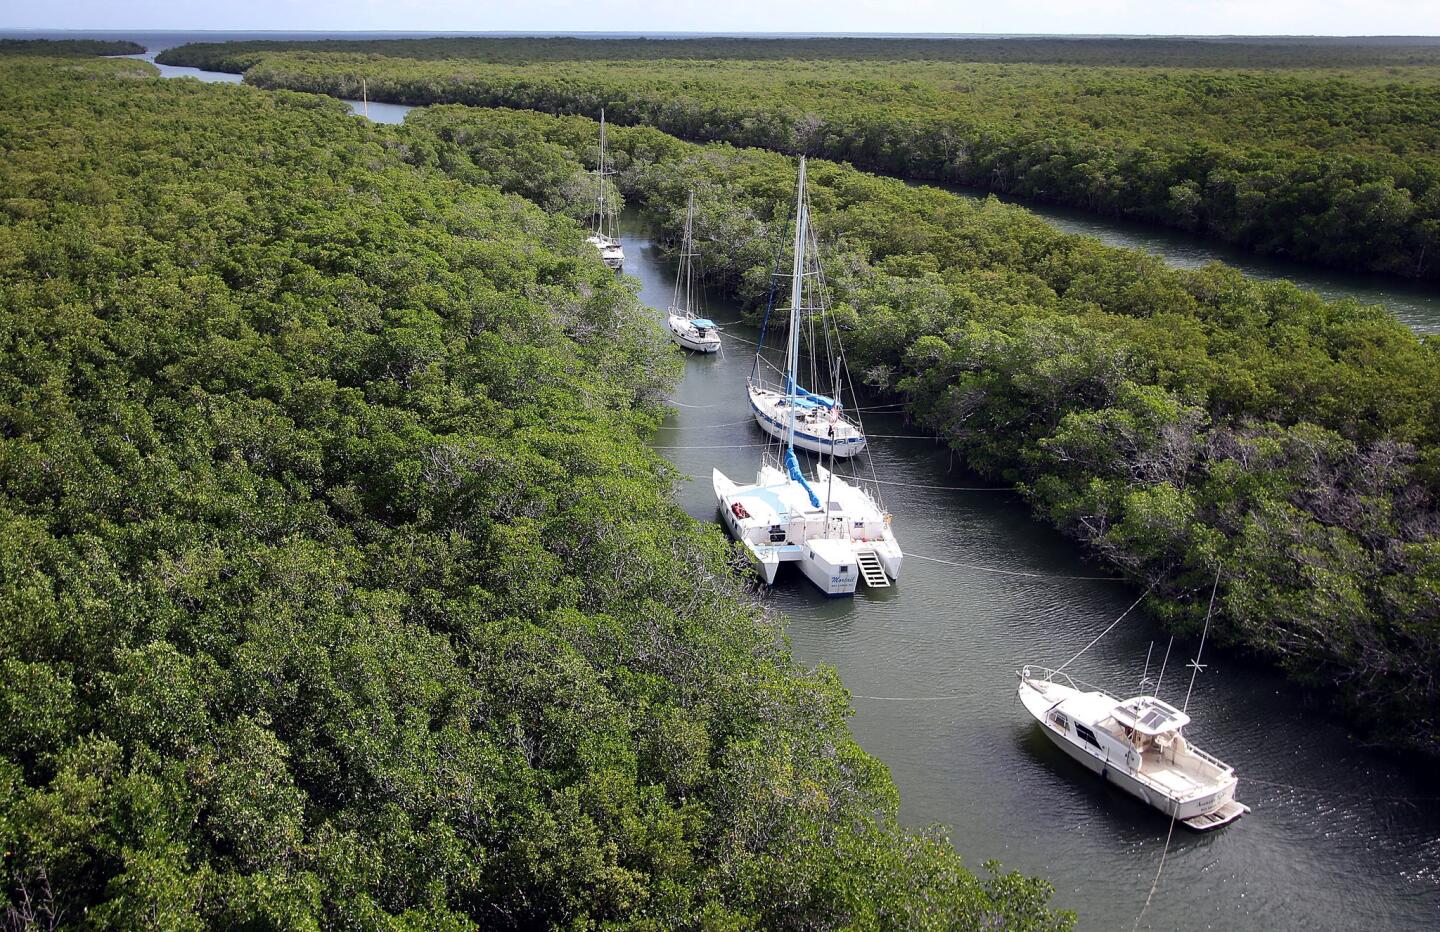 Boats that can't be evacuated are tied off in canals to protect them from Hurricane Irma on in Key Largo, Florida. The entire Florida Keys are under a mandatory evacuation notice as Hurricane Irma approaches the low-lying chain of islands south of Miami.